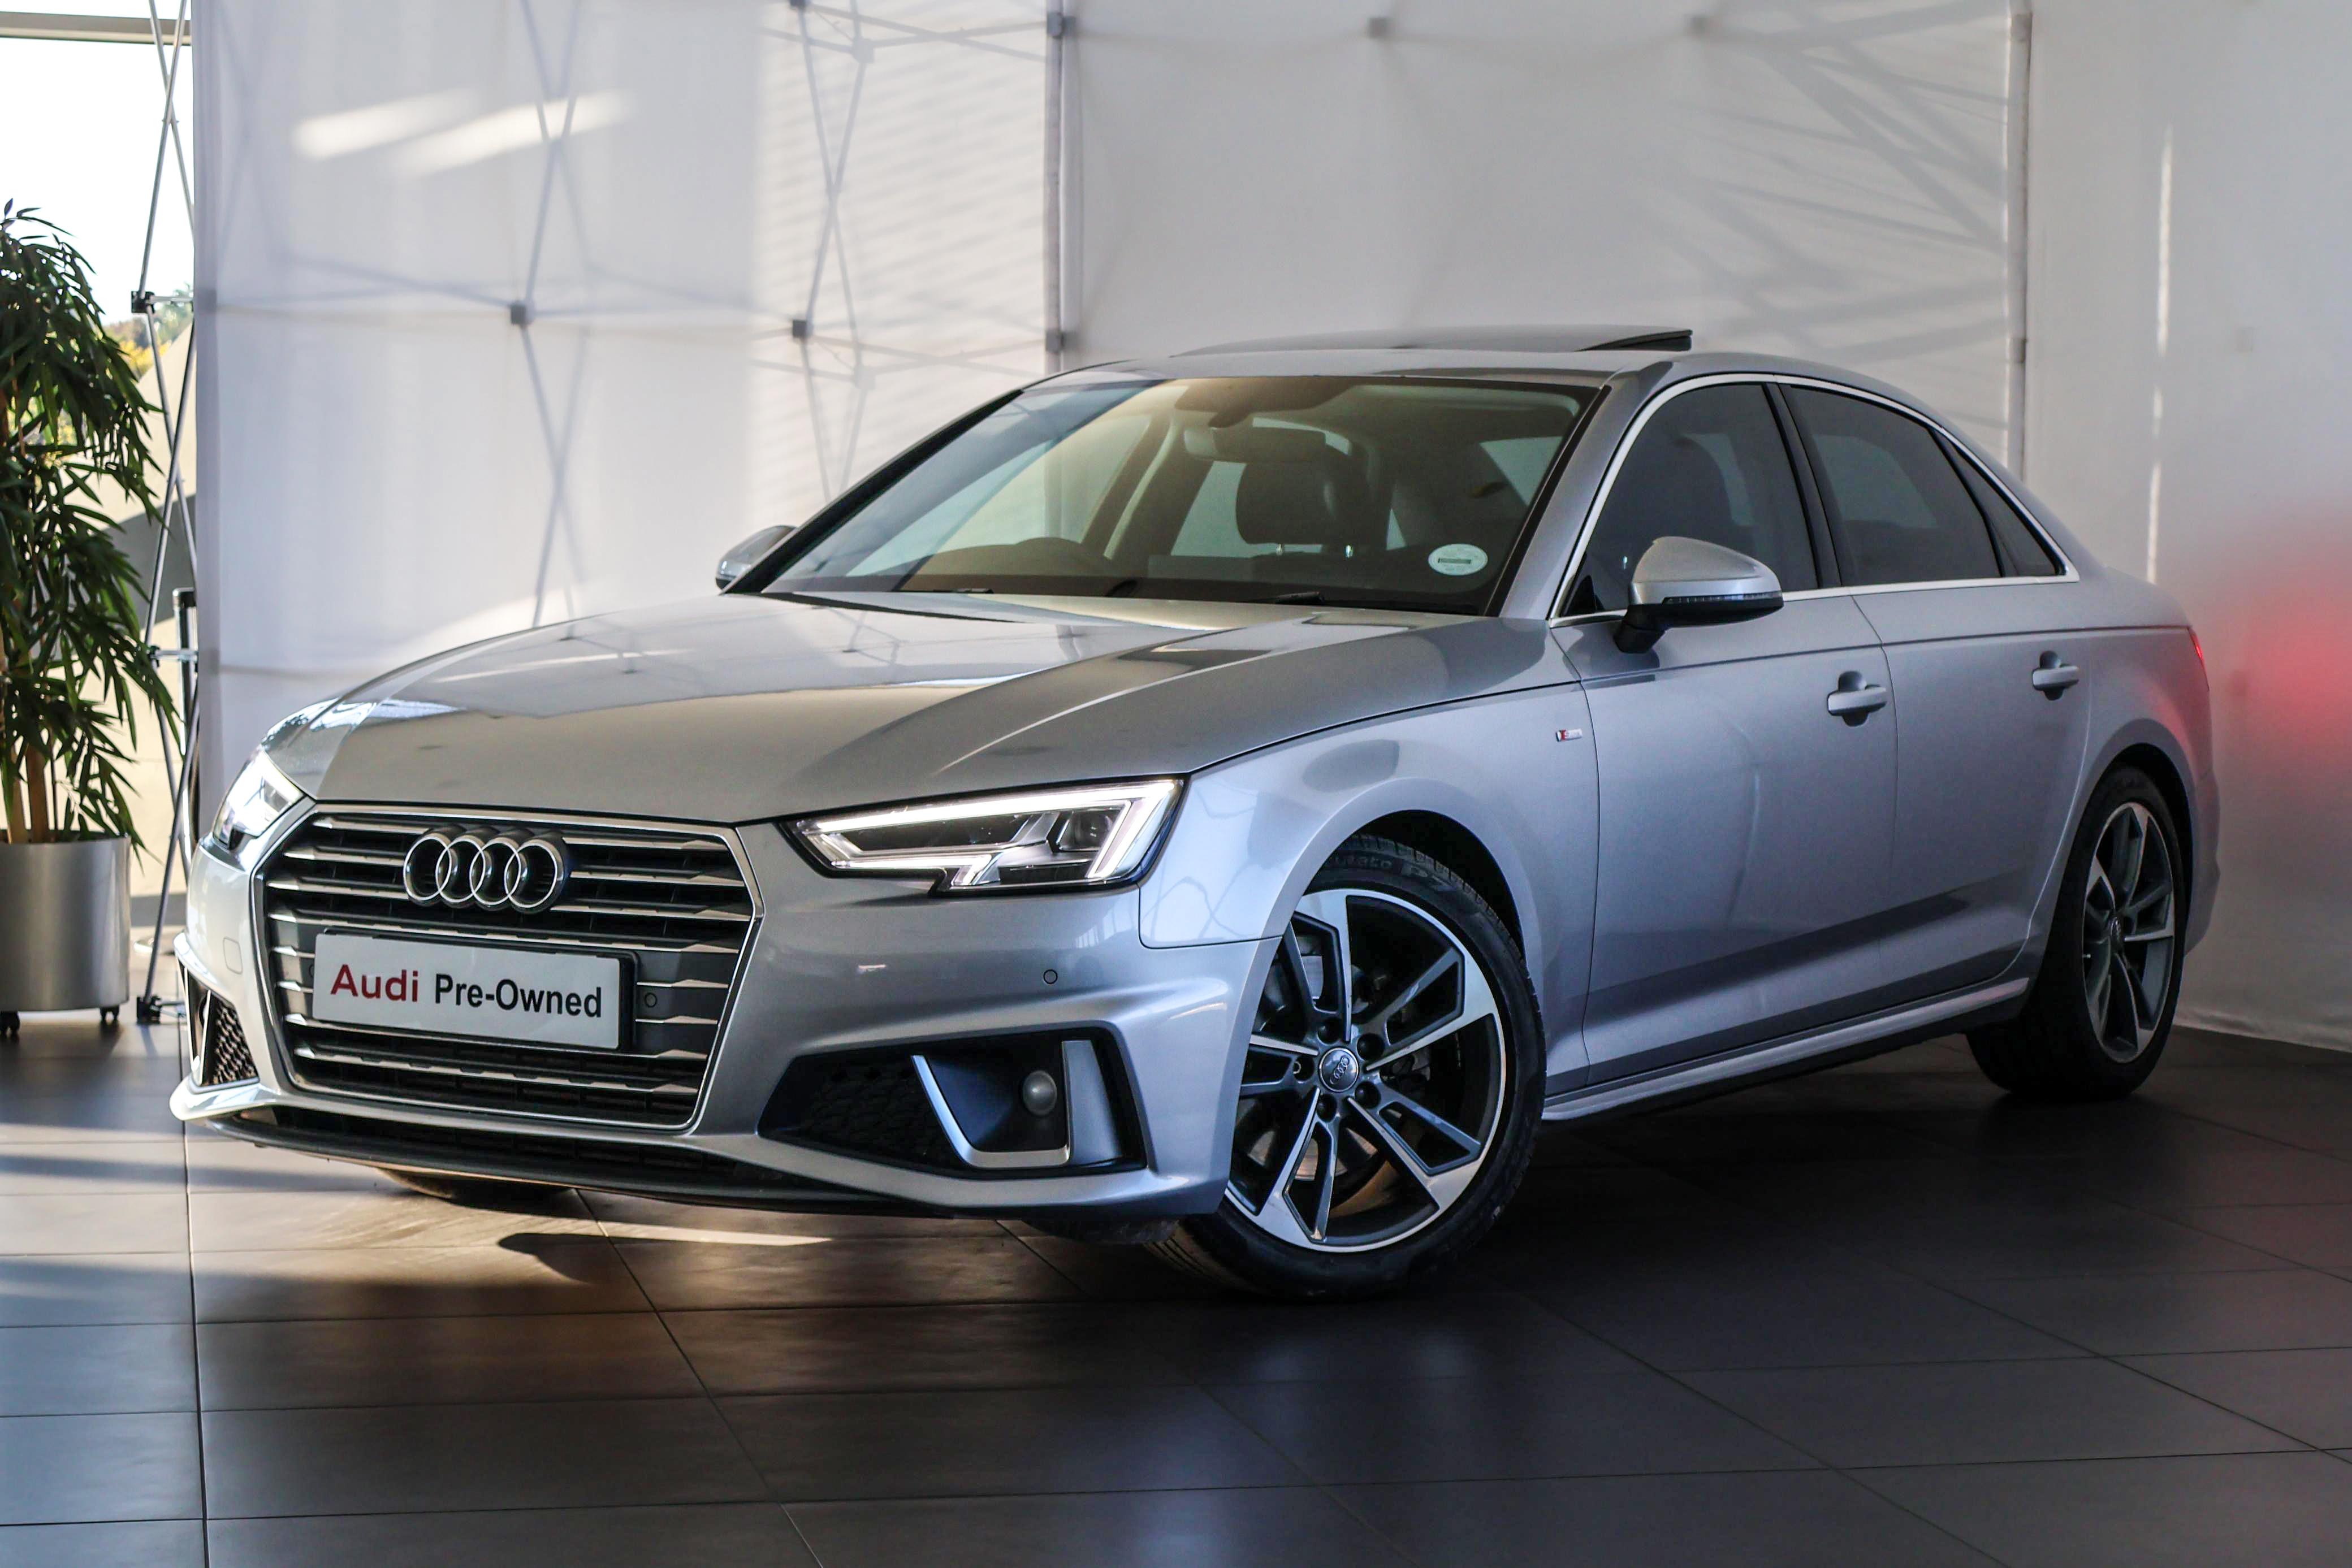 2019 Audi A4  for sale - 5486891